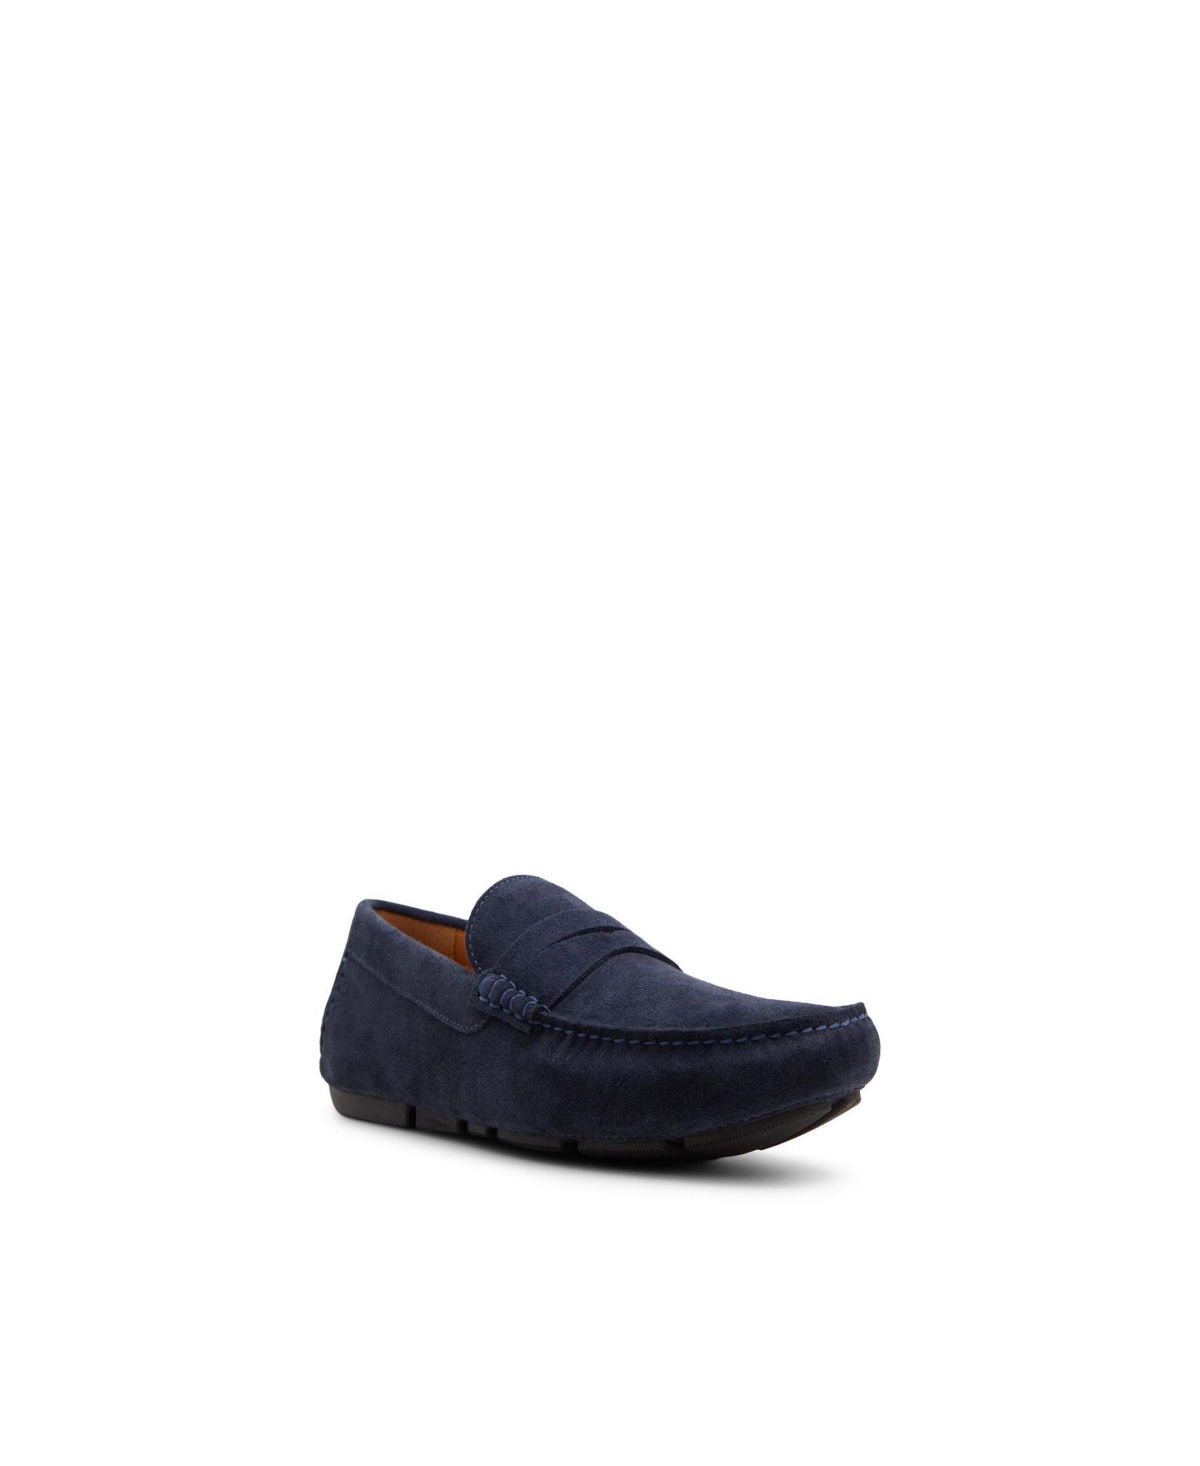 Men's Jefferson Moccasin Driving Loafers - Navy